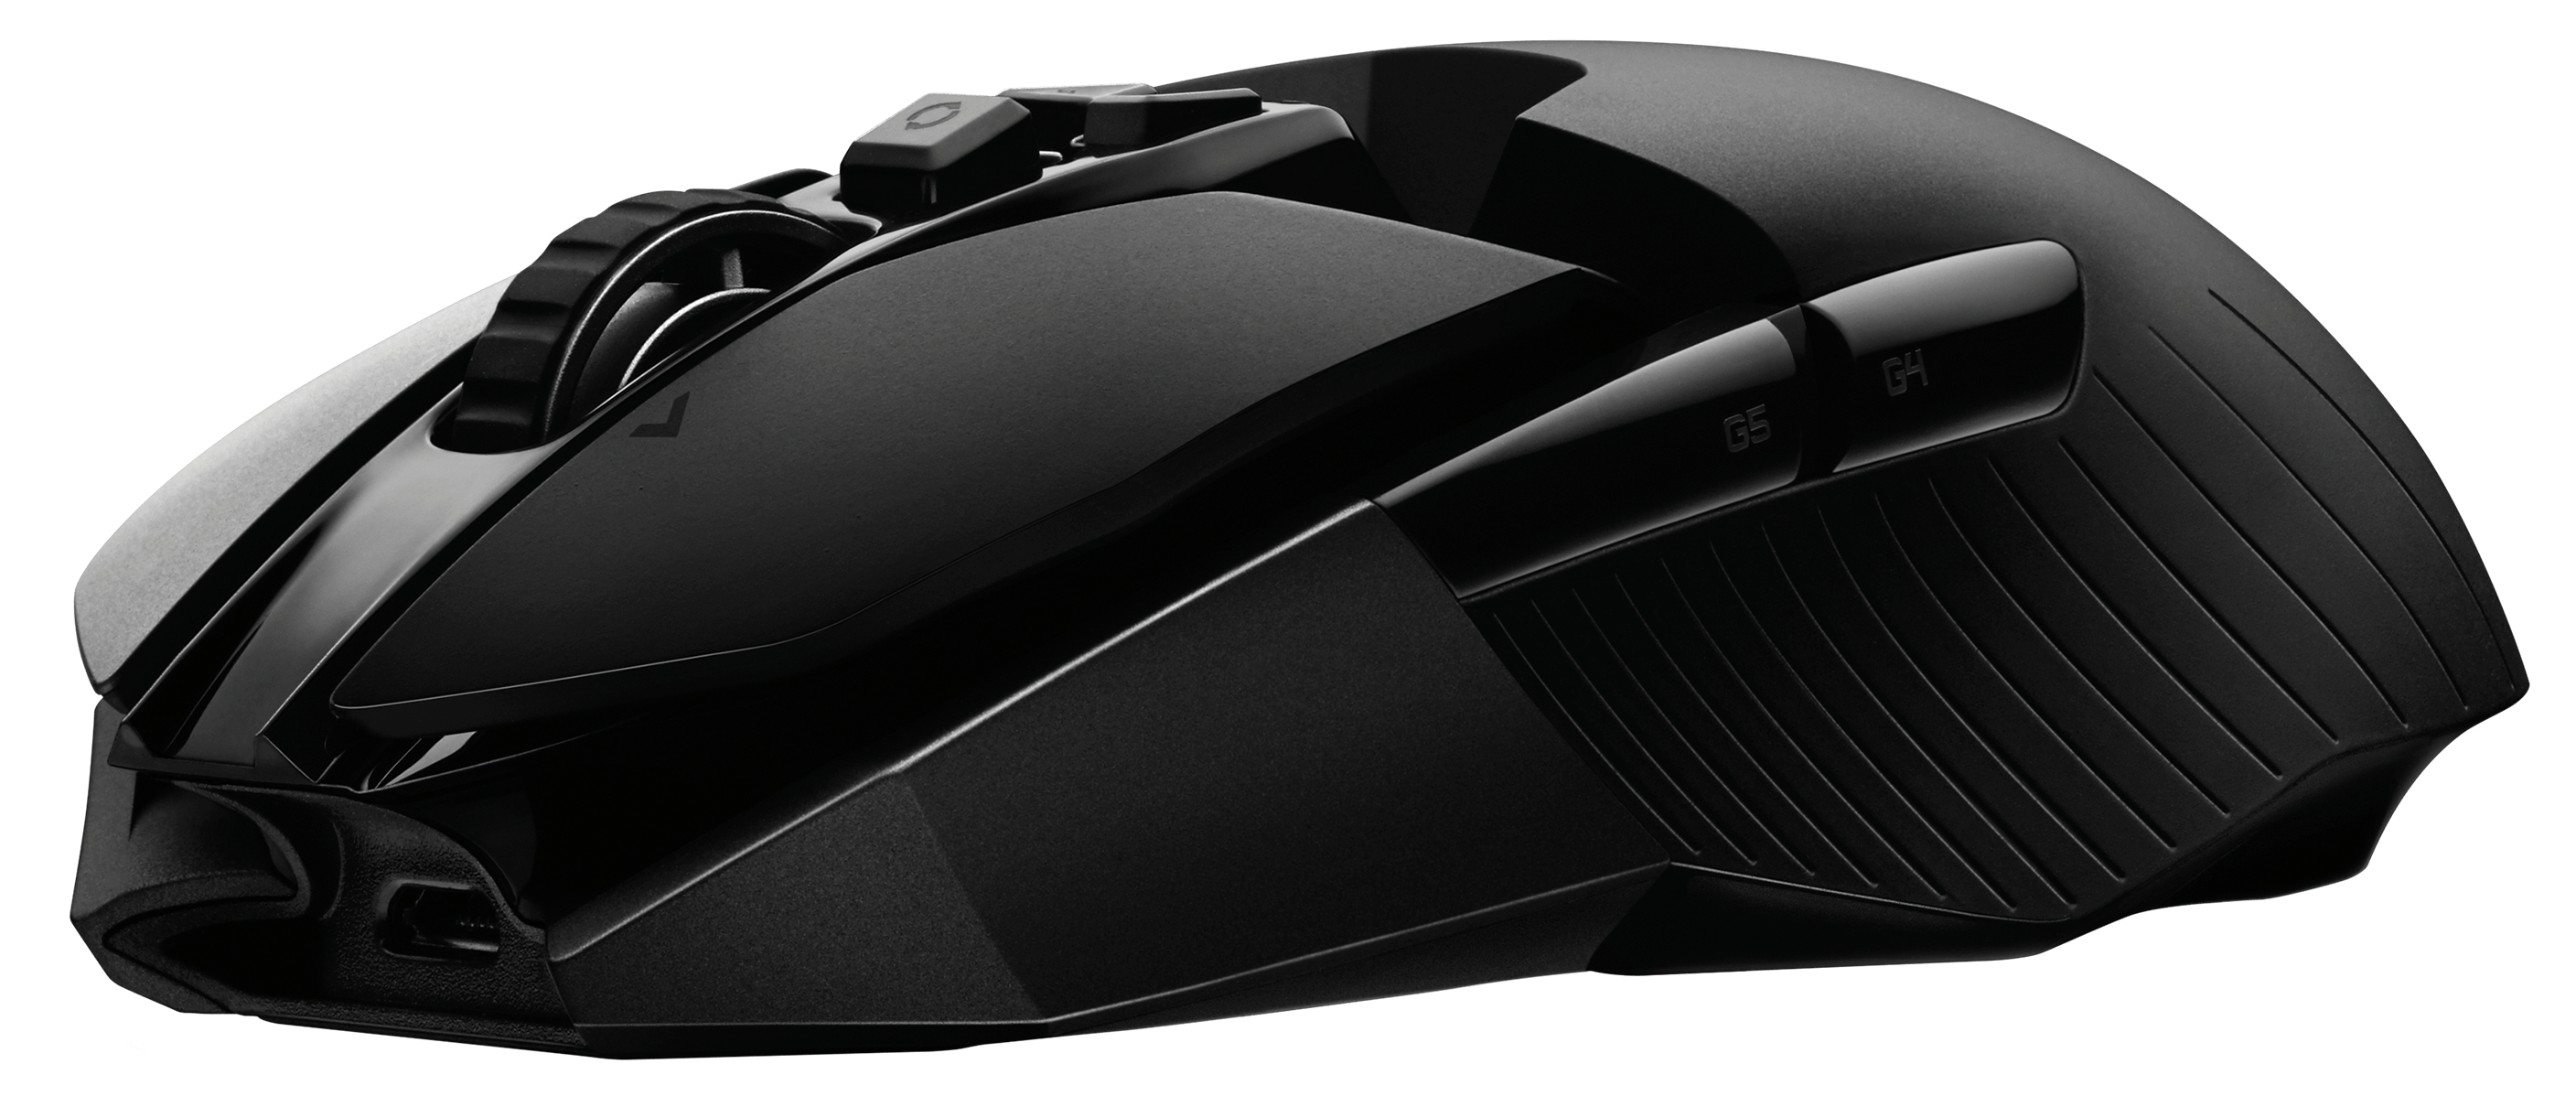 Logitech G 910-005673 G903 LIGHTSPEED Wireless Gaming Mouse with HERO 16K Sensor/140+ Hour with Rechargeable Battery and LIGHTSYNC RGB/POWERPLAY Compatible/Ambidextrous/107g+10g Optional/16000 DPI